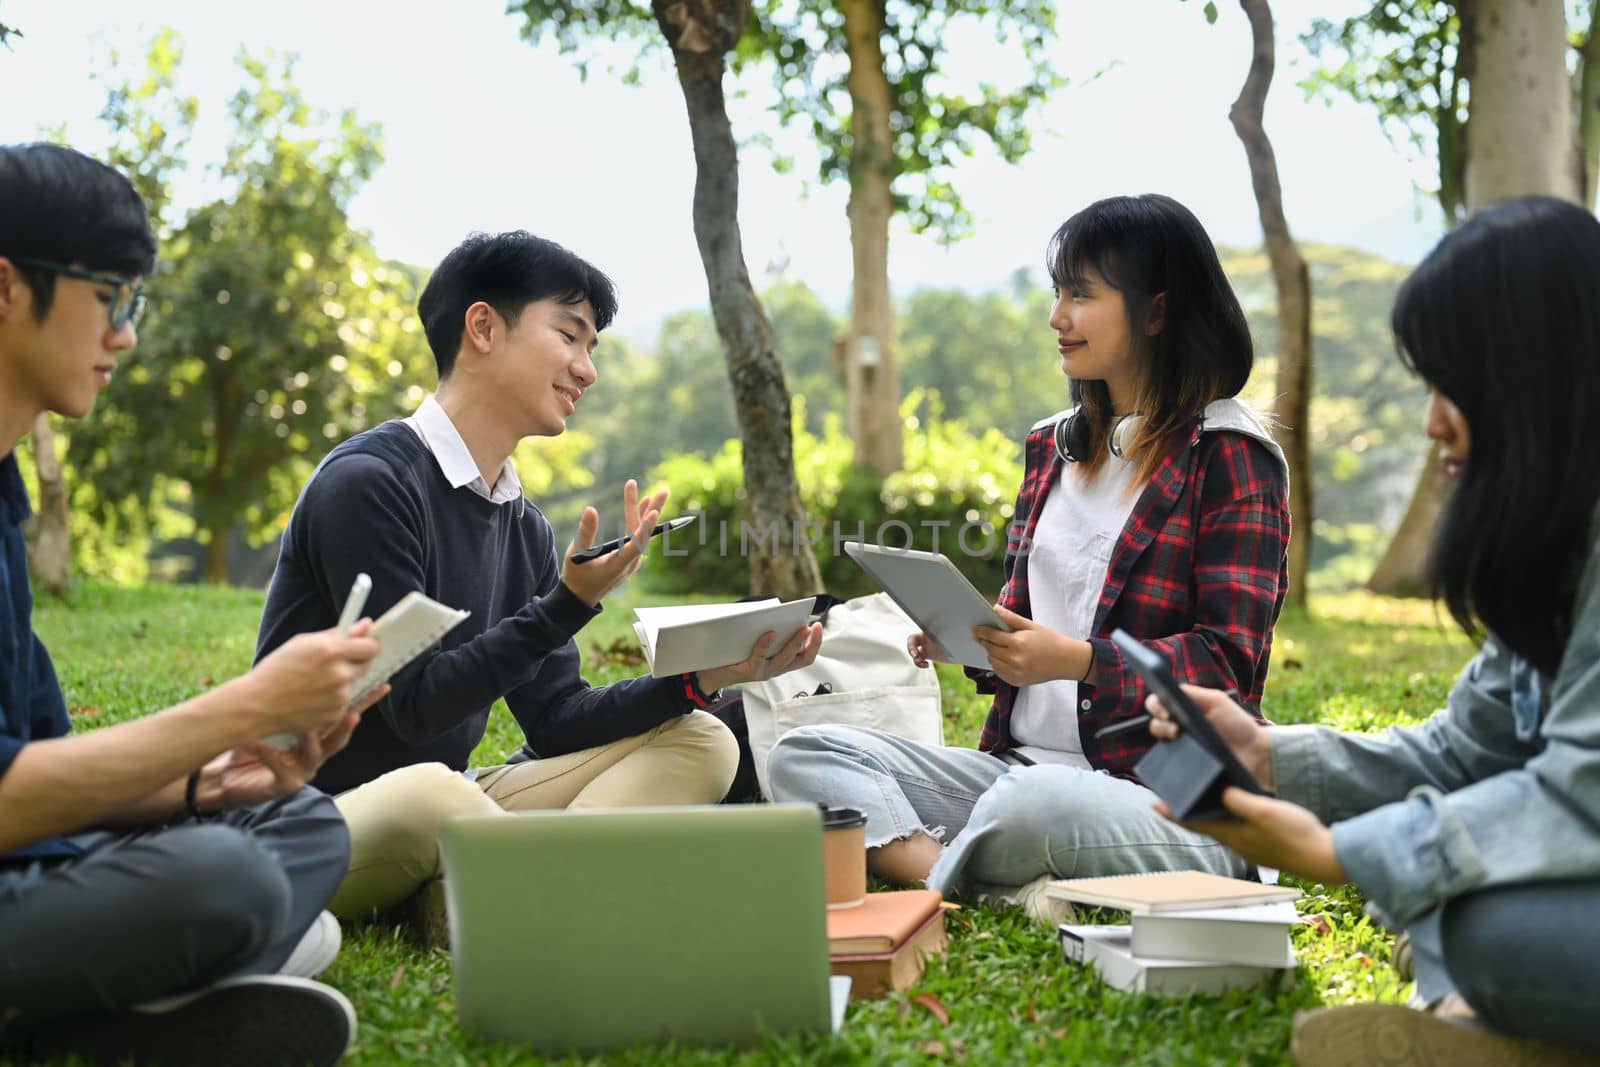 Happy university students talking, relaxing on campus lawn and working on laptop together. Education and lifestyle concept.